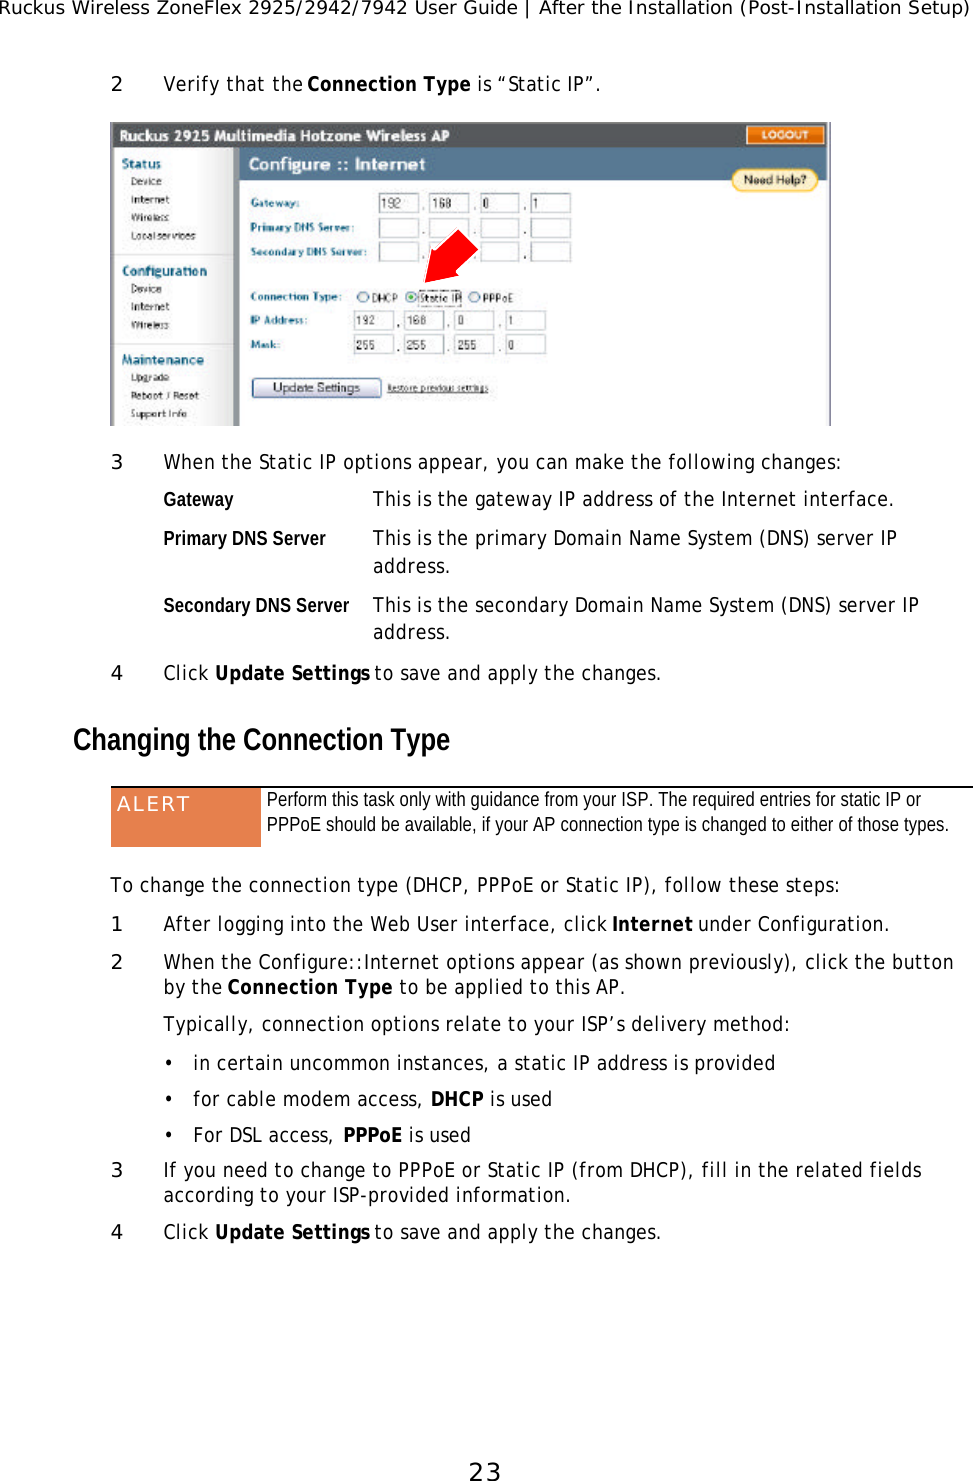 Ruckus Wireless ZoneFlex 2925/2942/7942 User Guide | After the Installation (Post-Installation Setup)232Verify that the Connection Type is “Static IP”. 3When the Static IP options appear, you can make the following changes:Gateway This is the gateway IP address of the Internet interface.Primary DNS Server This is the primary Domain Name System (DNS) server IP address.Secondary DNS Server This is the secondary Domain Name System (DNS) server IP address.4Click Update Settings to save and apply the changes.Changing the Connection Type To change the connection type (DHCP, PPPoE or Static IP), follow these steps:1After logging into the Web User interface, click Internet under Configuration.2When the Configure::Internet options appear (as shown previously), click the button by the Connection Type to be applied to this AP.Typically, connection options relate to your ISP’s delivery method:•in certain uncommon instances, a static IP address is provided•for cable modem access, DHCP is used•For DSL access, PPPoE is used3If you need to change to PPPoE or Static IP (from DHCP), fill in the related fields according to your ISP-provided information.4Click Update Settings to save and apply the changes.ALERT Perform this task only with guidance from your ISP. The required entries for static IP or PPPoE should be available, if your AP connection type is changed to either of those types.